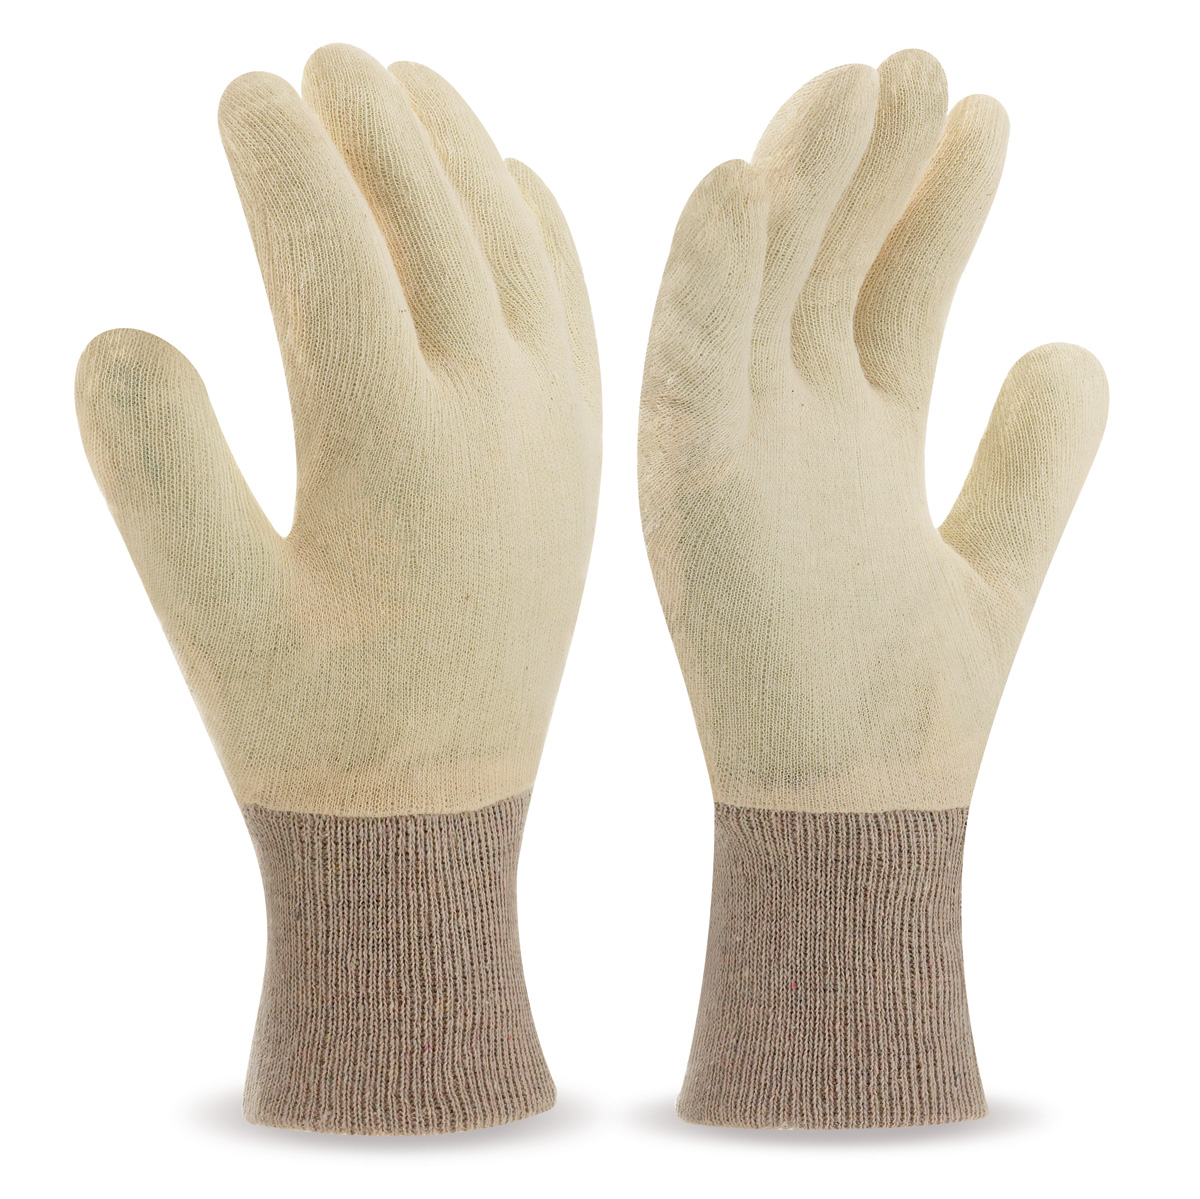 688-G Work Gloves Cotton Cotton canvas gloves with PVC points on the palm and fingertips